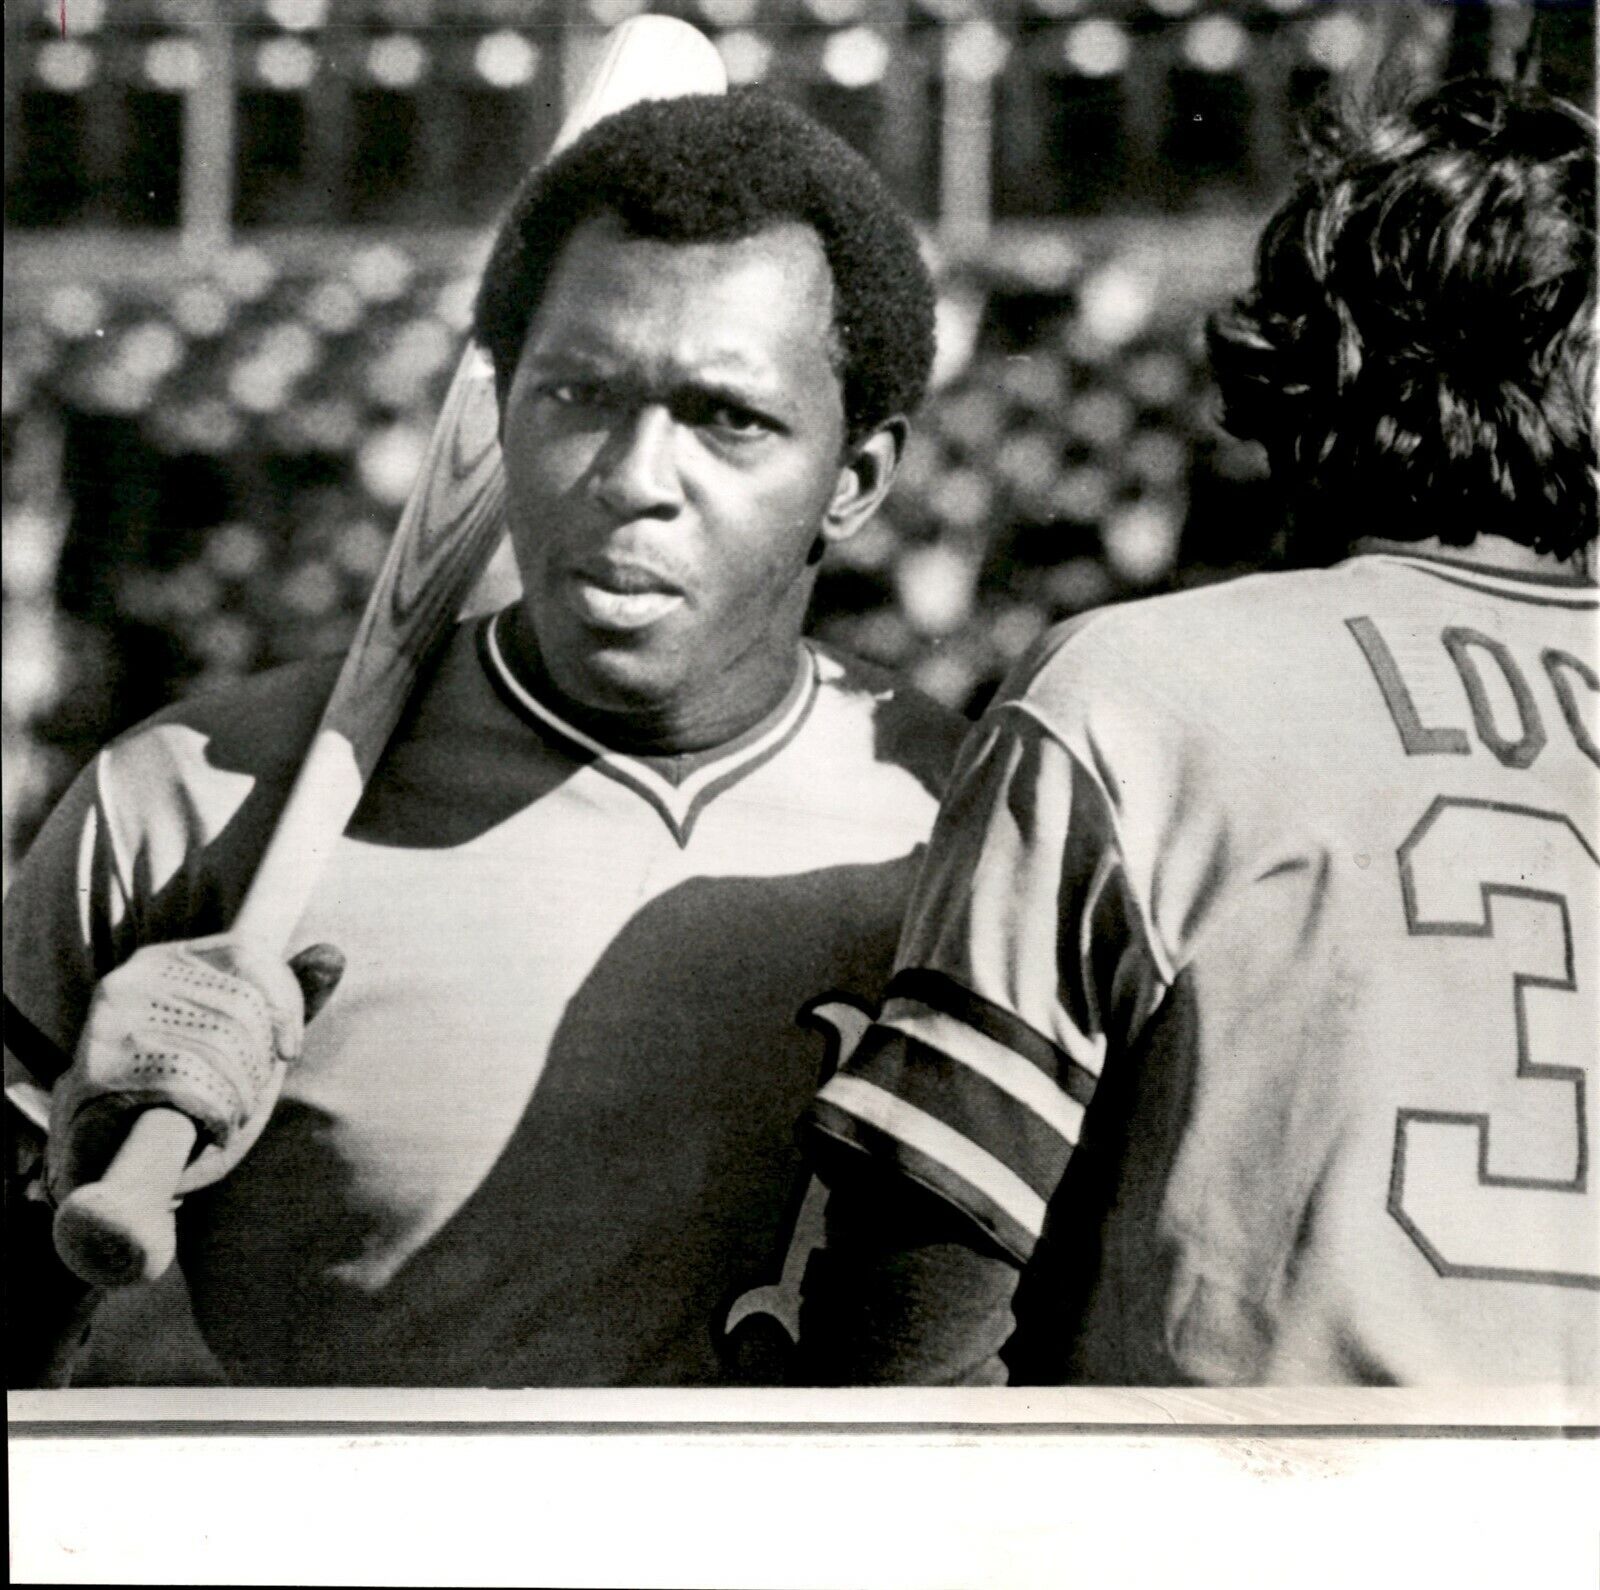 LG961 1972 AP Wire Photo VIDA BLUE BATTING CAGES ACTIVATED BY OAKLAND ATHLETICS